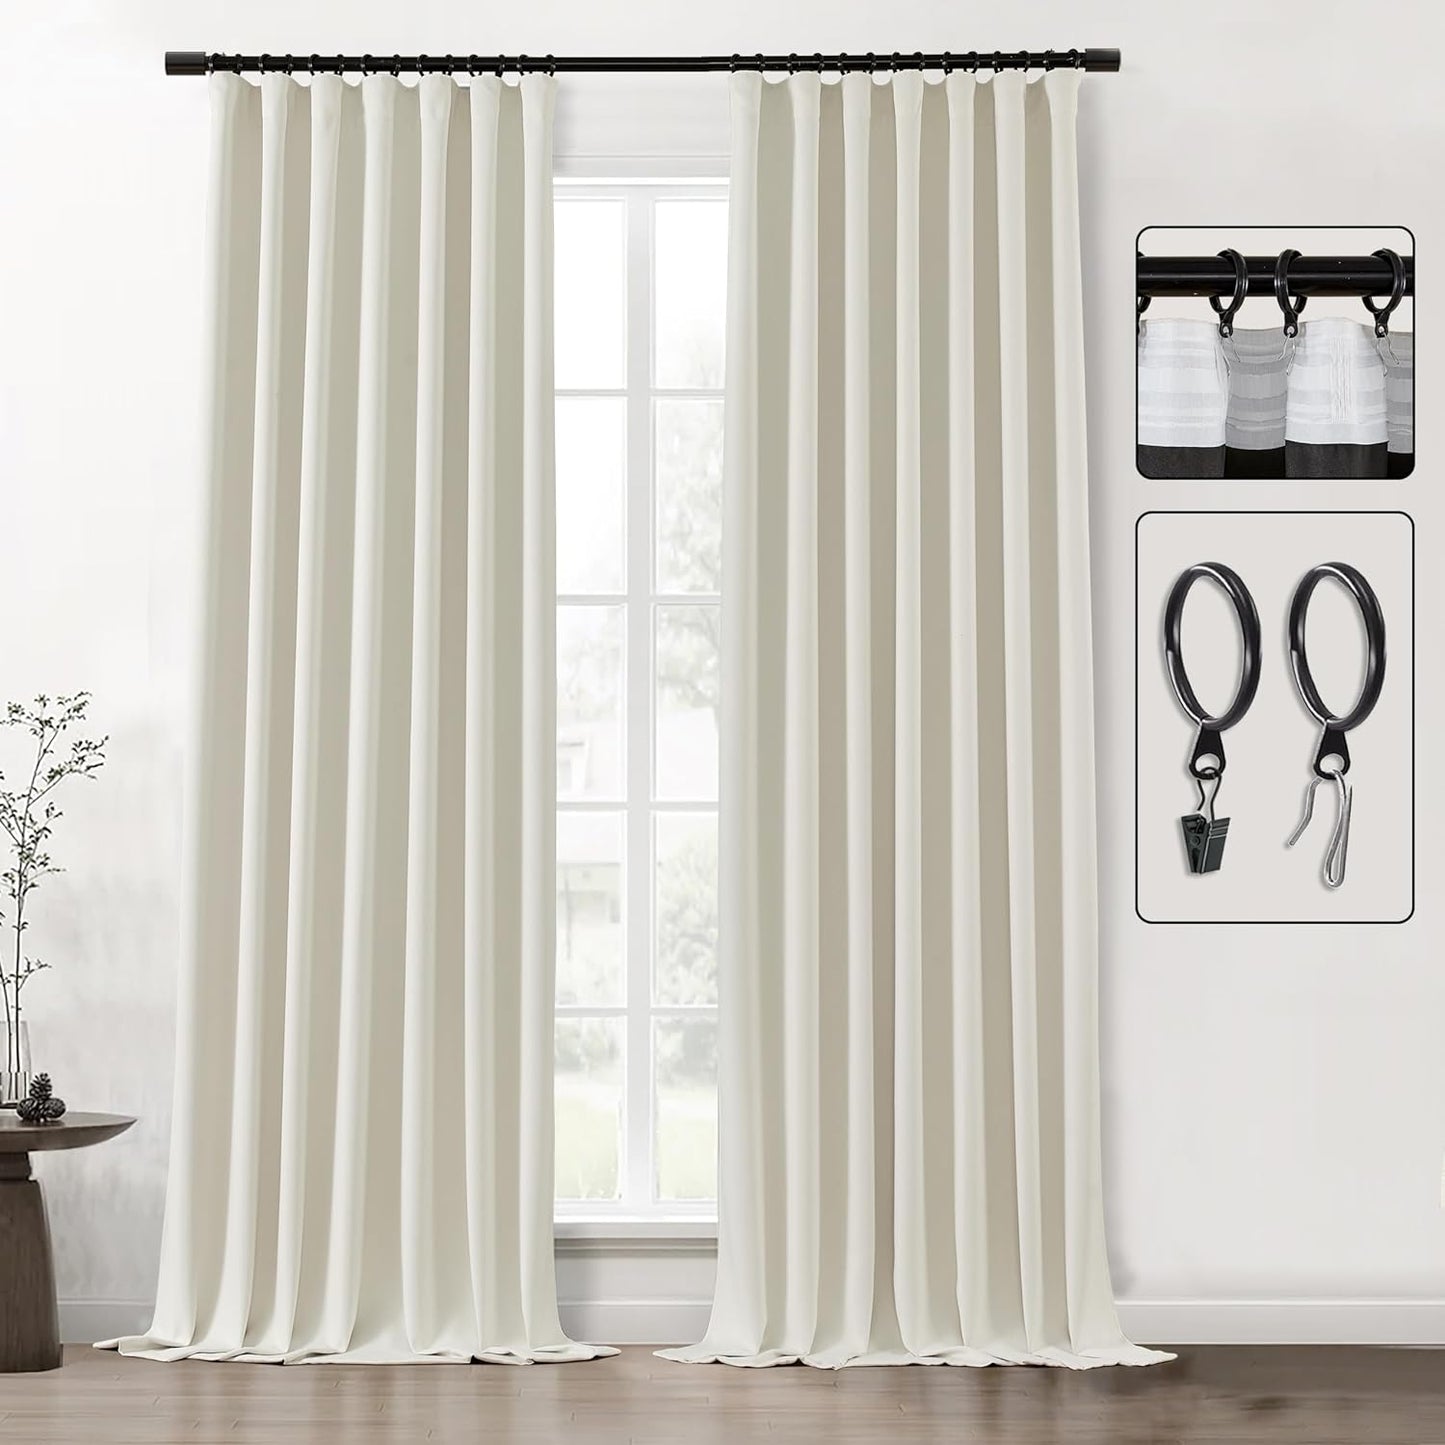 SHINELAND Beige Room Darkening Curtains 105 Inches Long for Living Room Bedroom,Cortinas Para Cuarto Bloqueador De Luz,Thermal Insulated Back Tab Pleat Blackout Curtains for Sunroom Patio Door Indoor  SHINELAND Cream 2X(52"Wx102"L) 